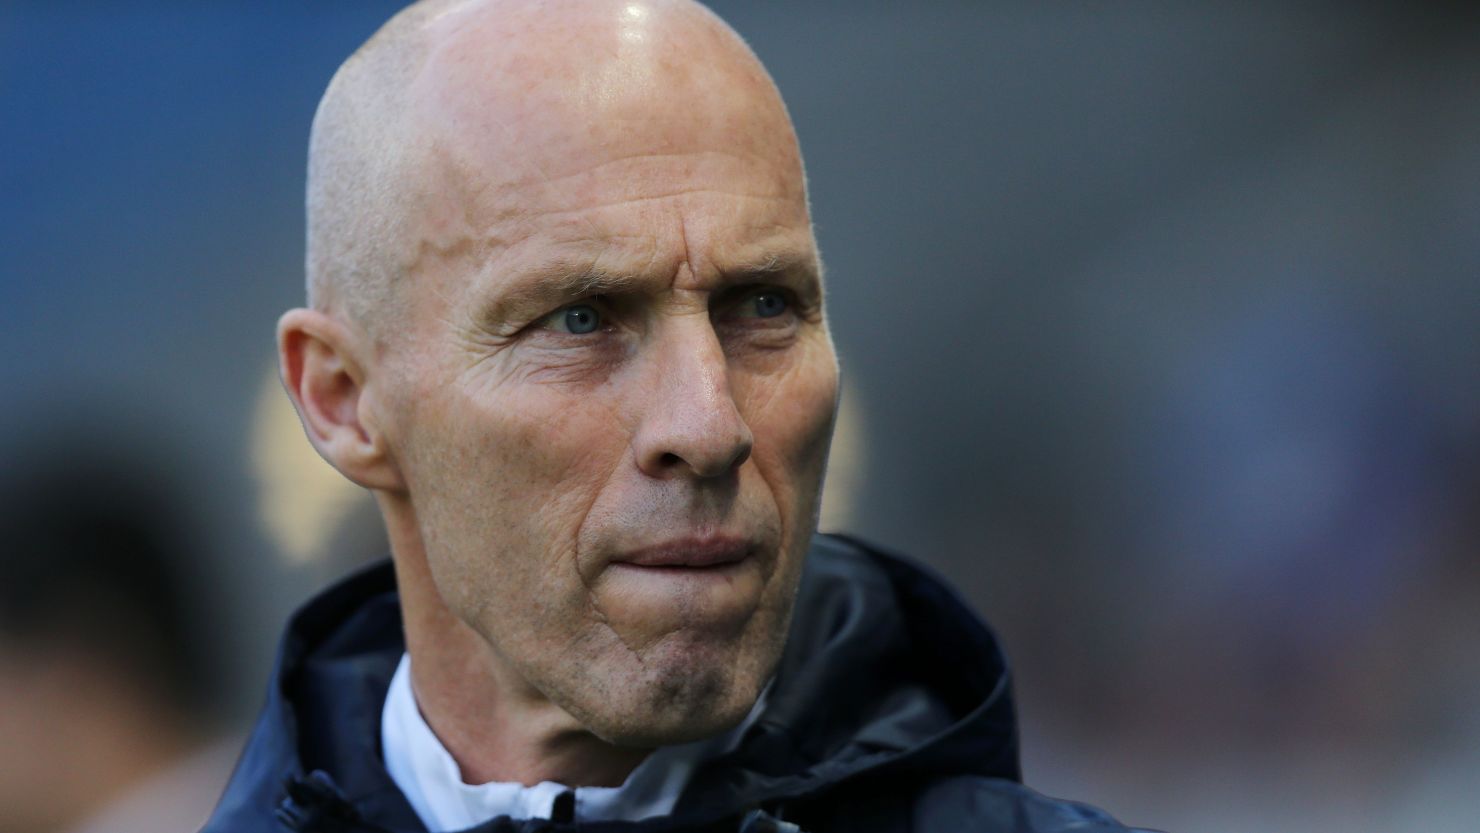 Bob Bradley, the new coach of Swansea City, led the US at the 2010 World Cup.